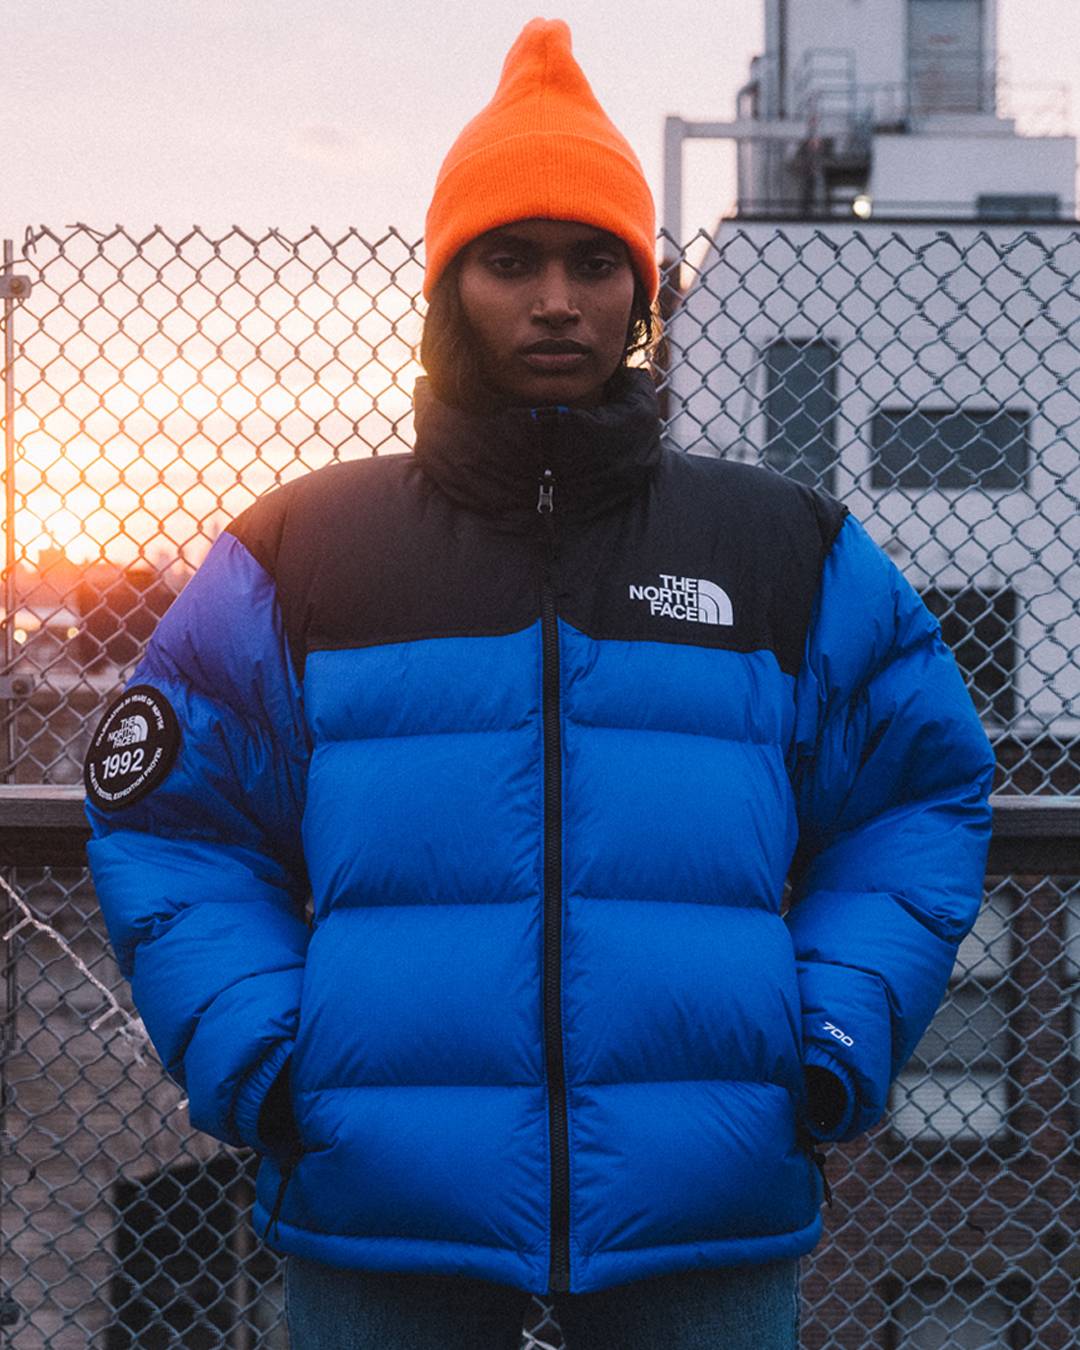 THE NORTH FACE jacket. - ブルゾン